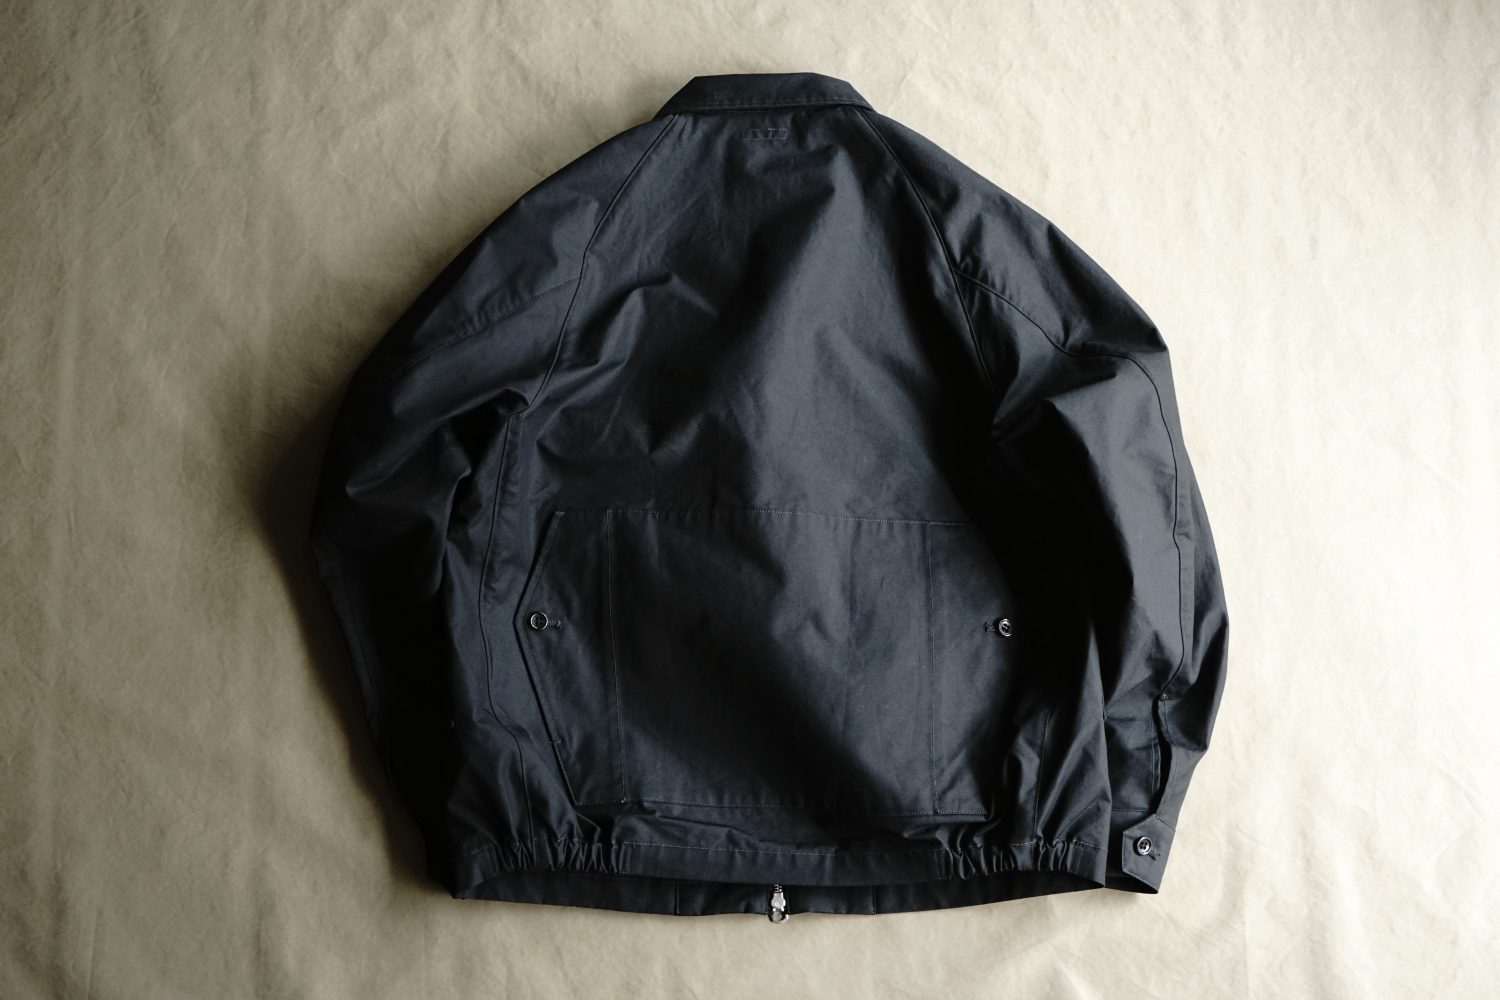 SUPLEX Limited Product “Hunting Sports Jacket”